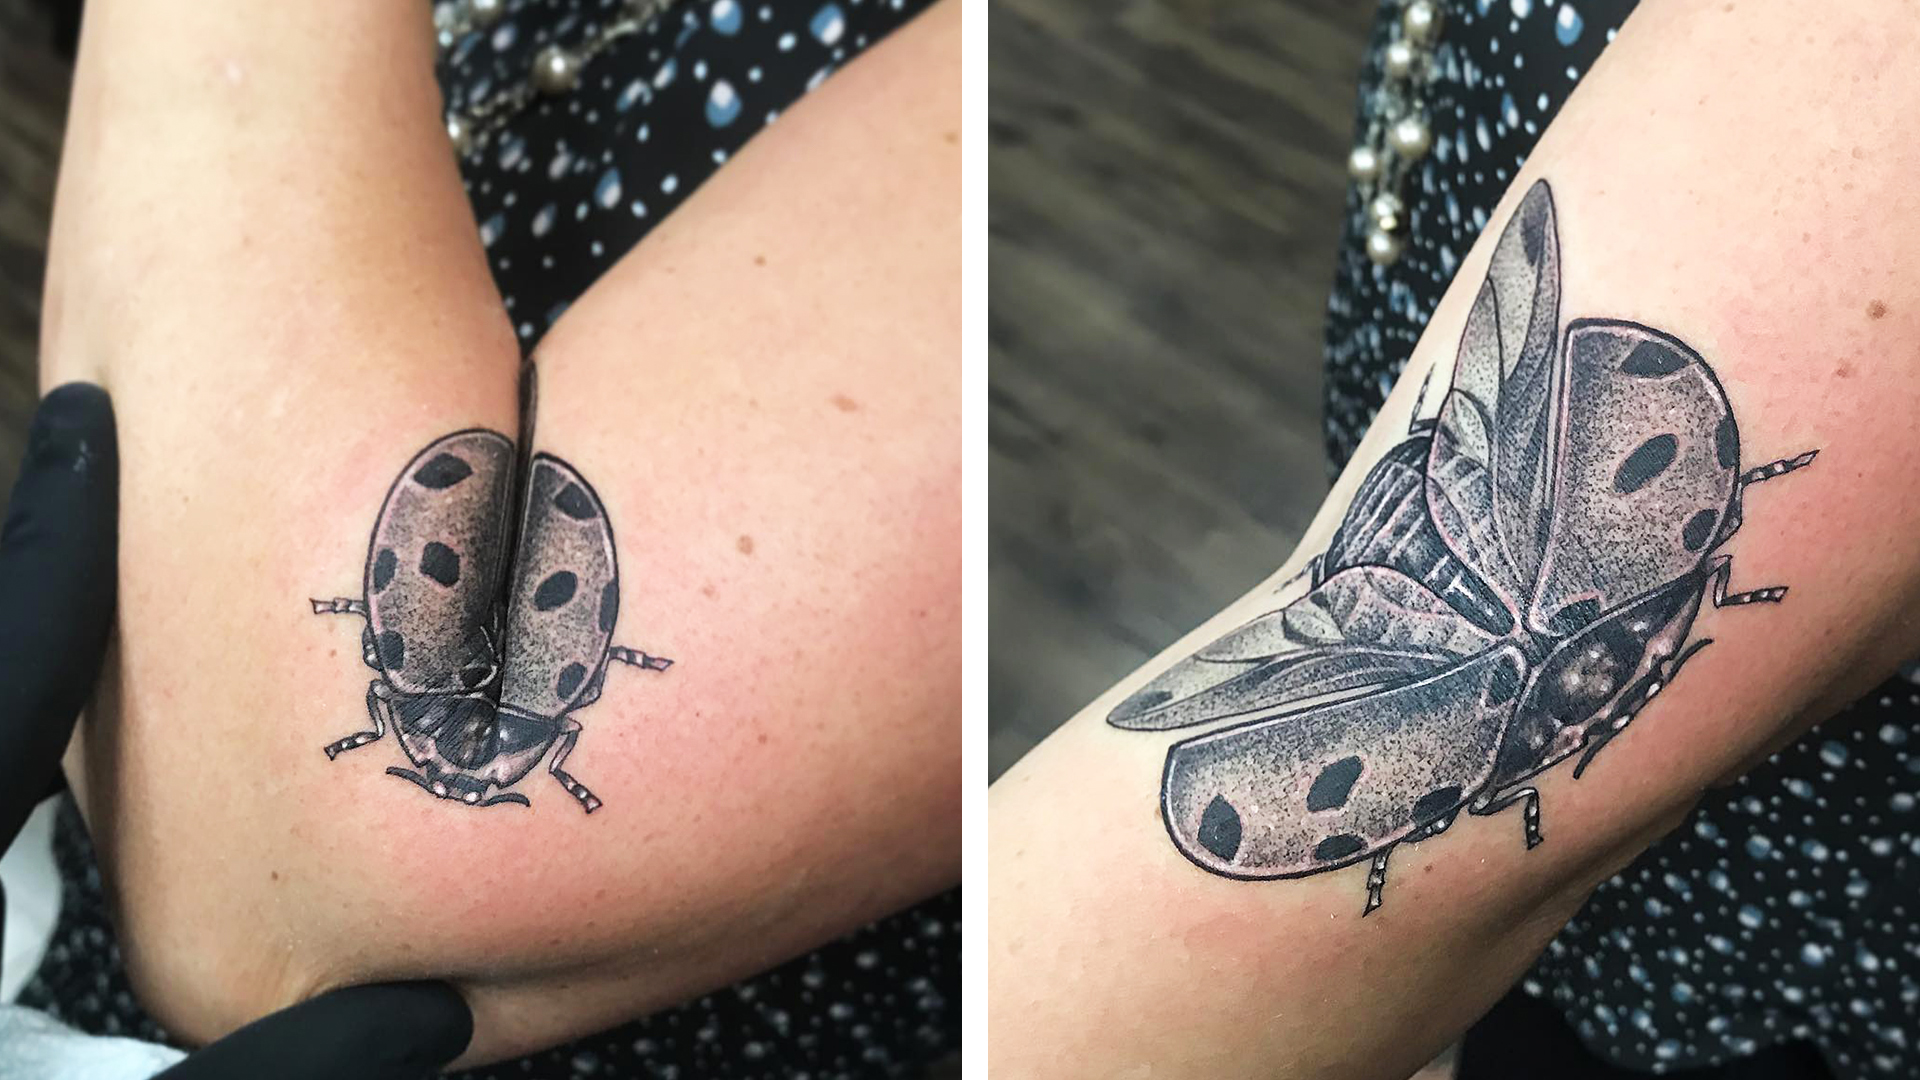 3. Bug Themed Temporary Tattoos - wide 9